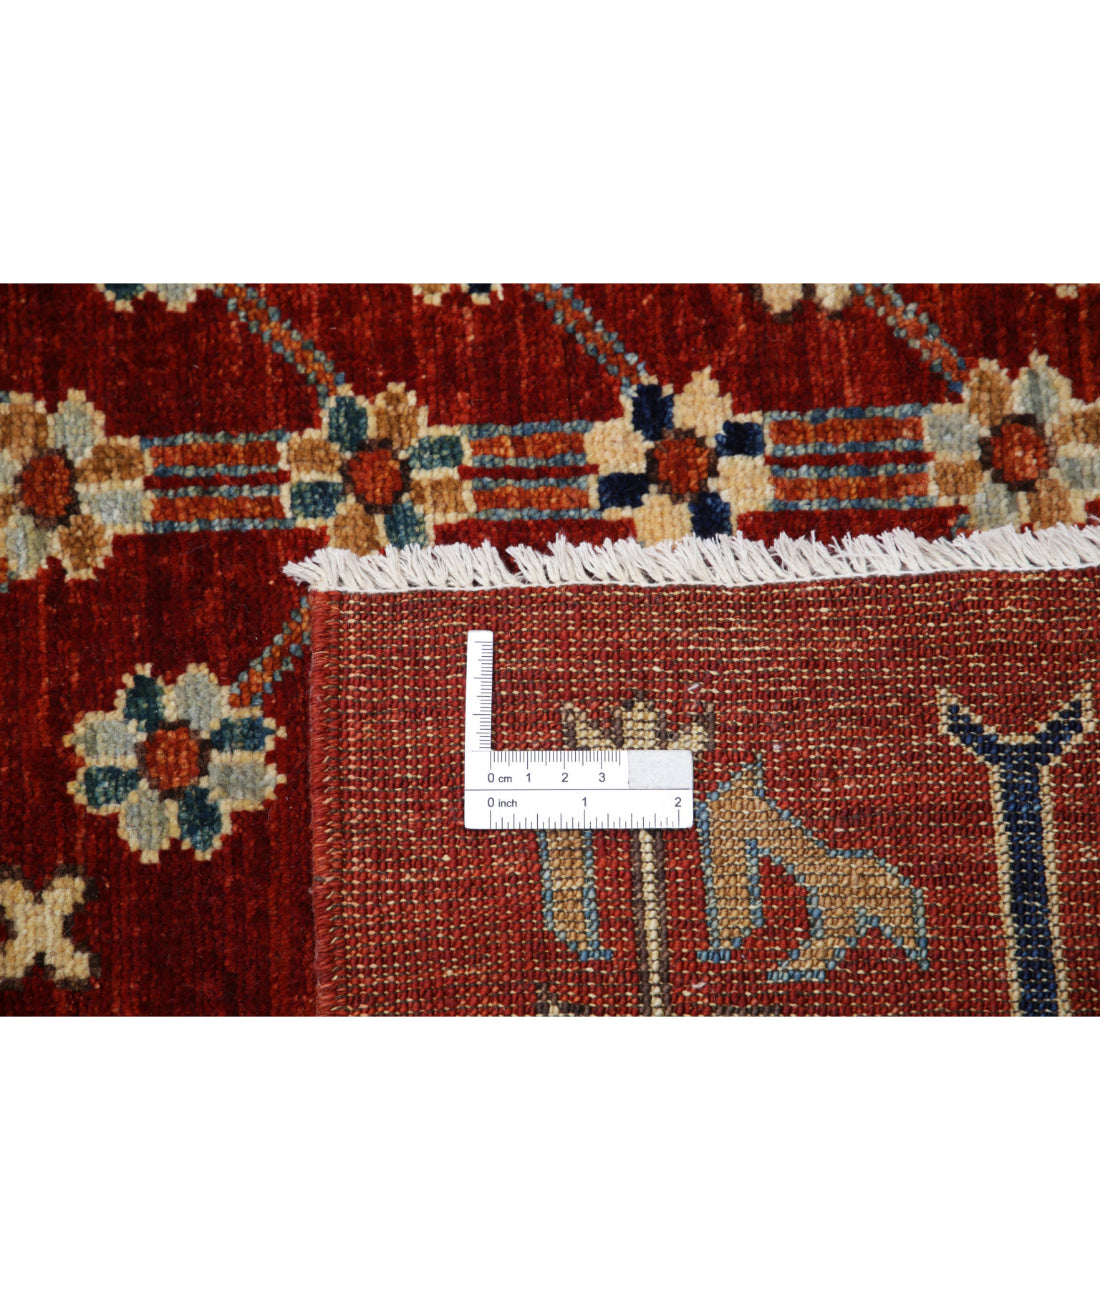 Hand Knotted Bakshaish Wool Rug - 10'0'' x 17'7'' 10'0'' x 17'7'' (300 X 528) / Red / Blue